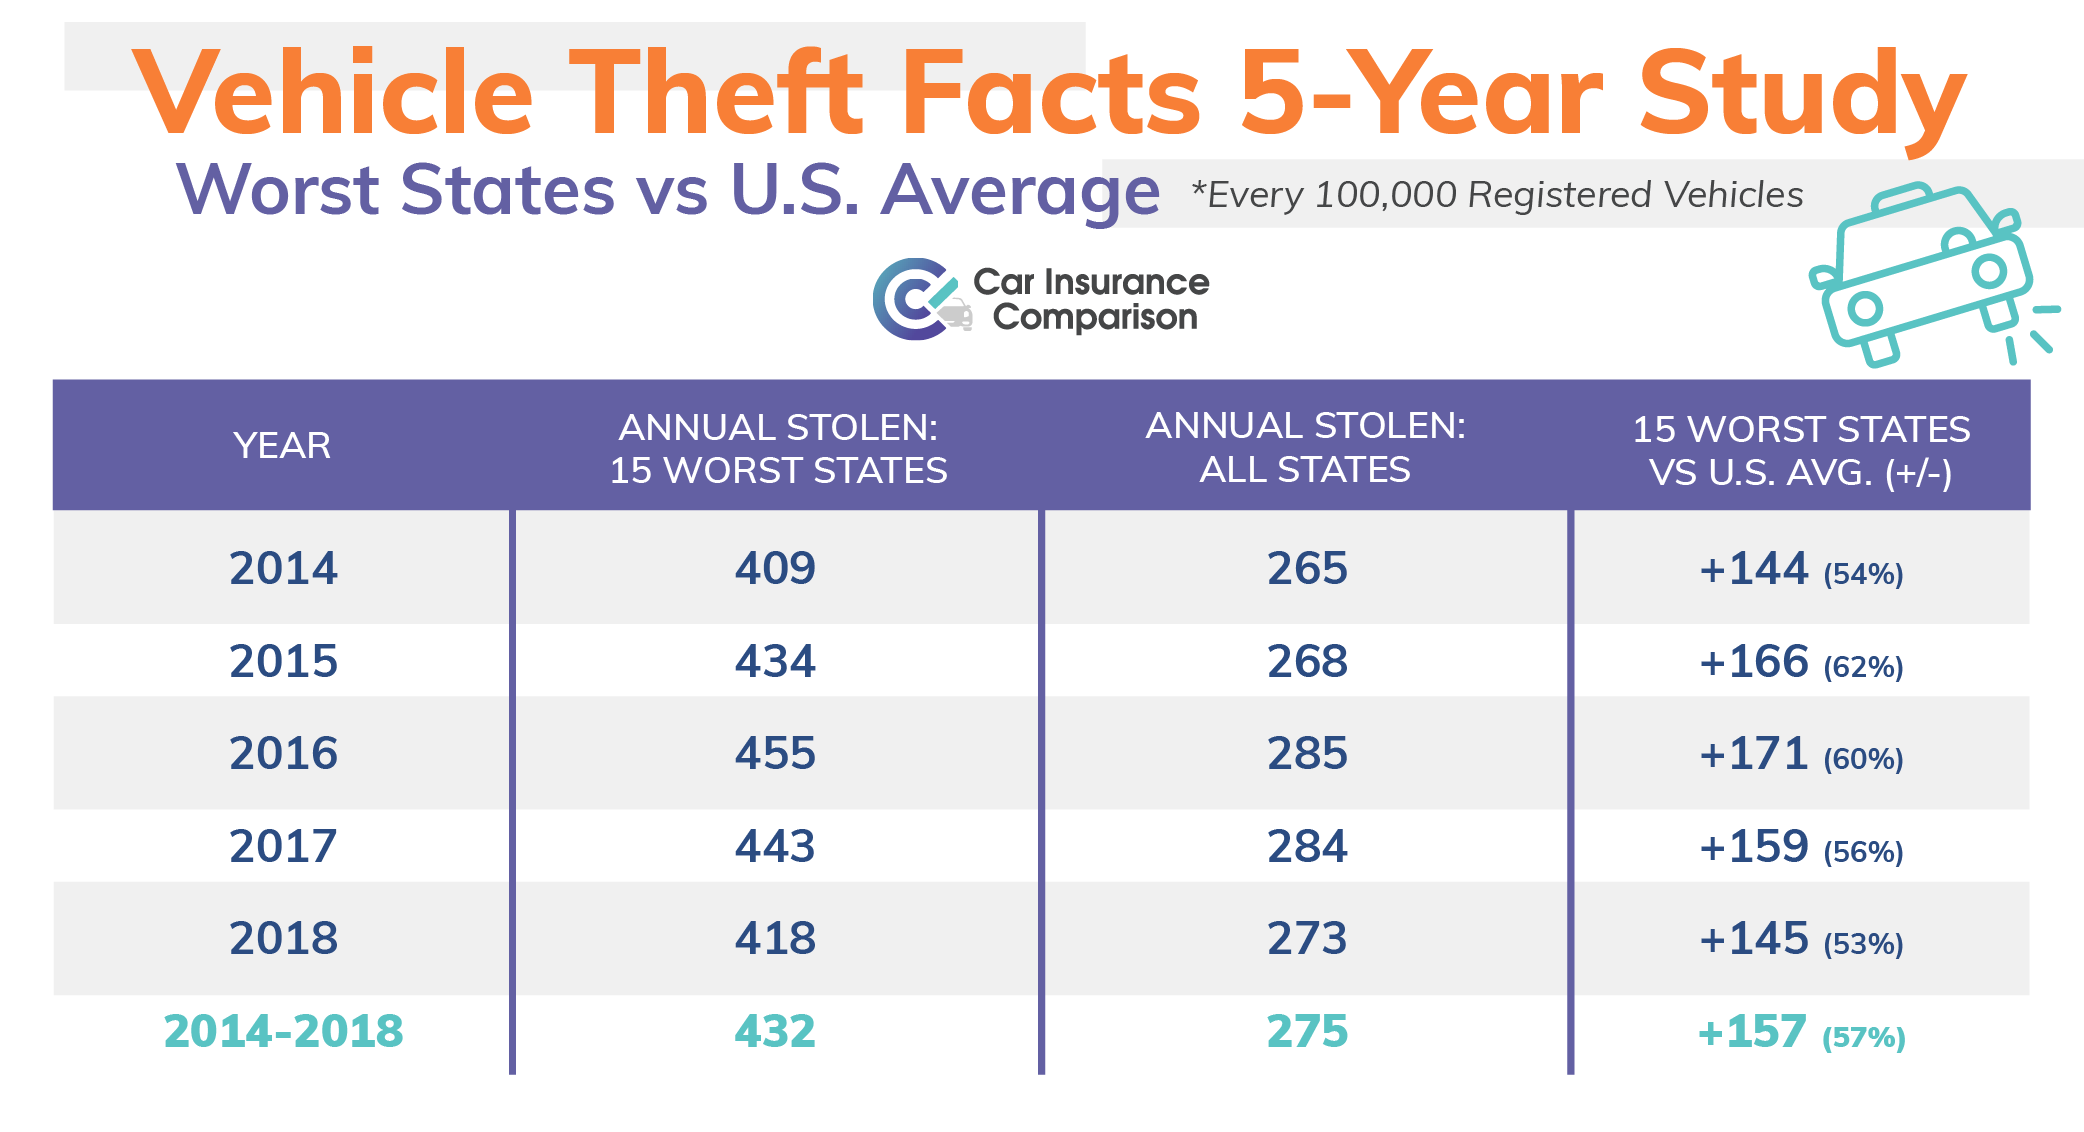 Vehicle Theft Facts 5-Year Study 15 Worst States for Vehicle Theft